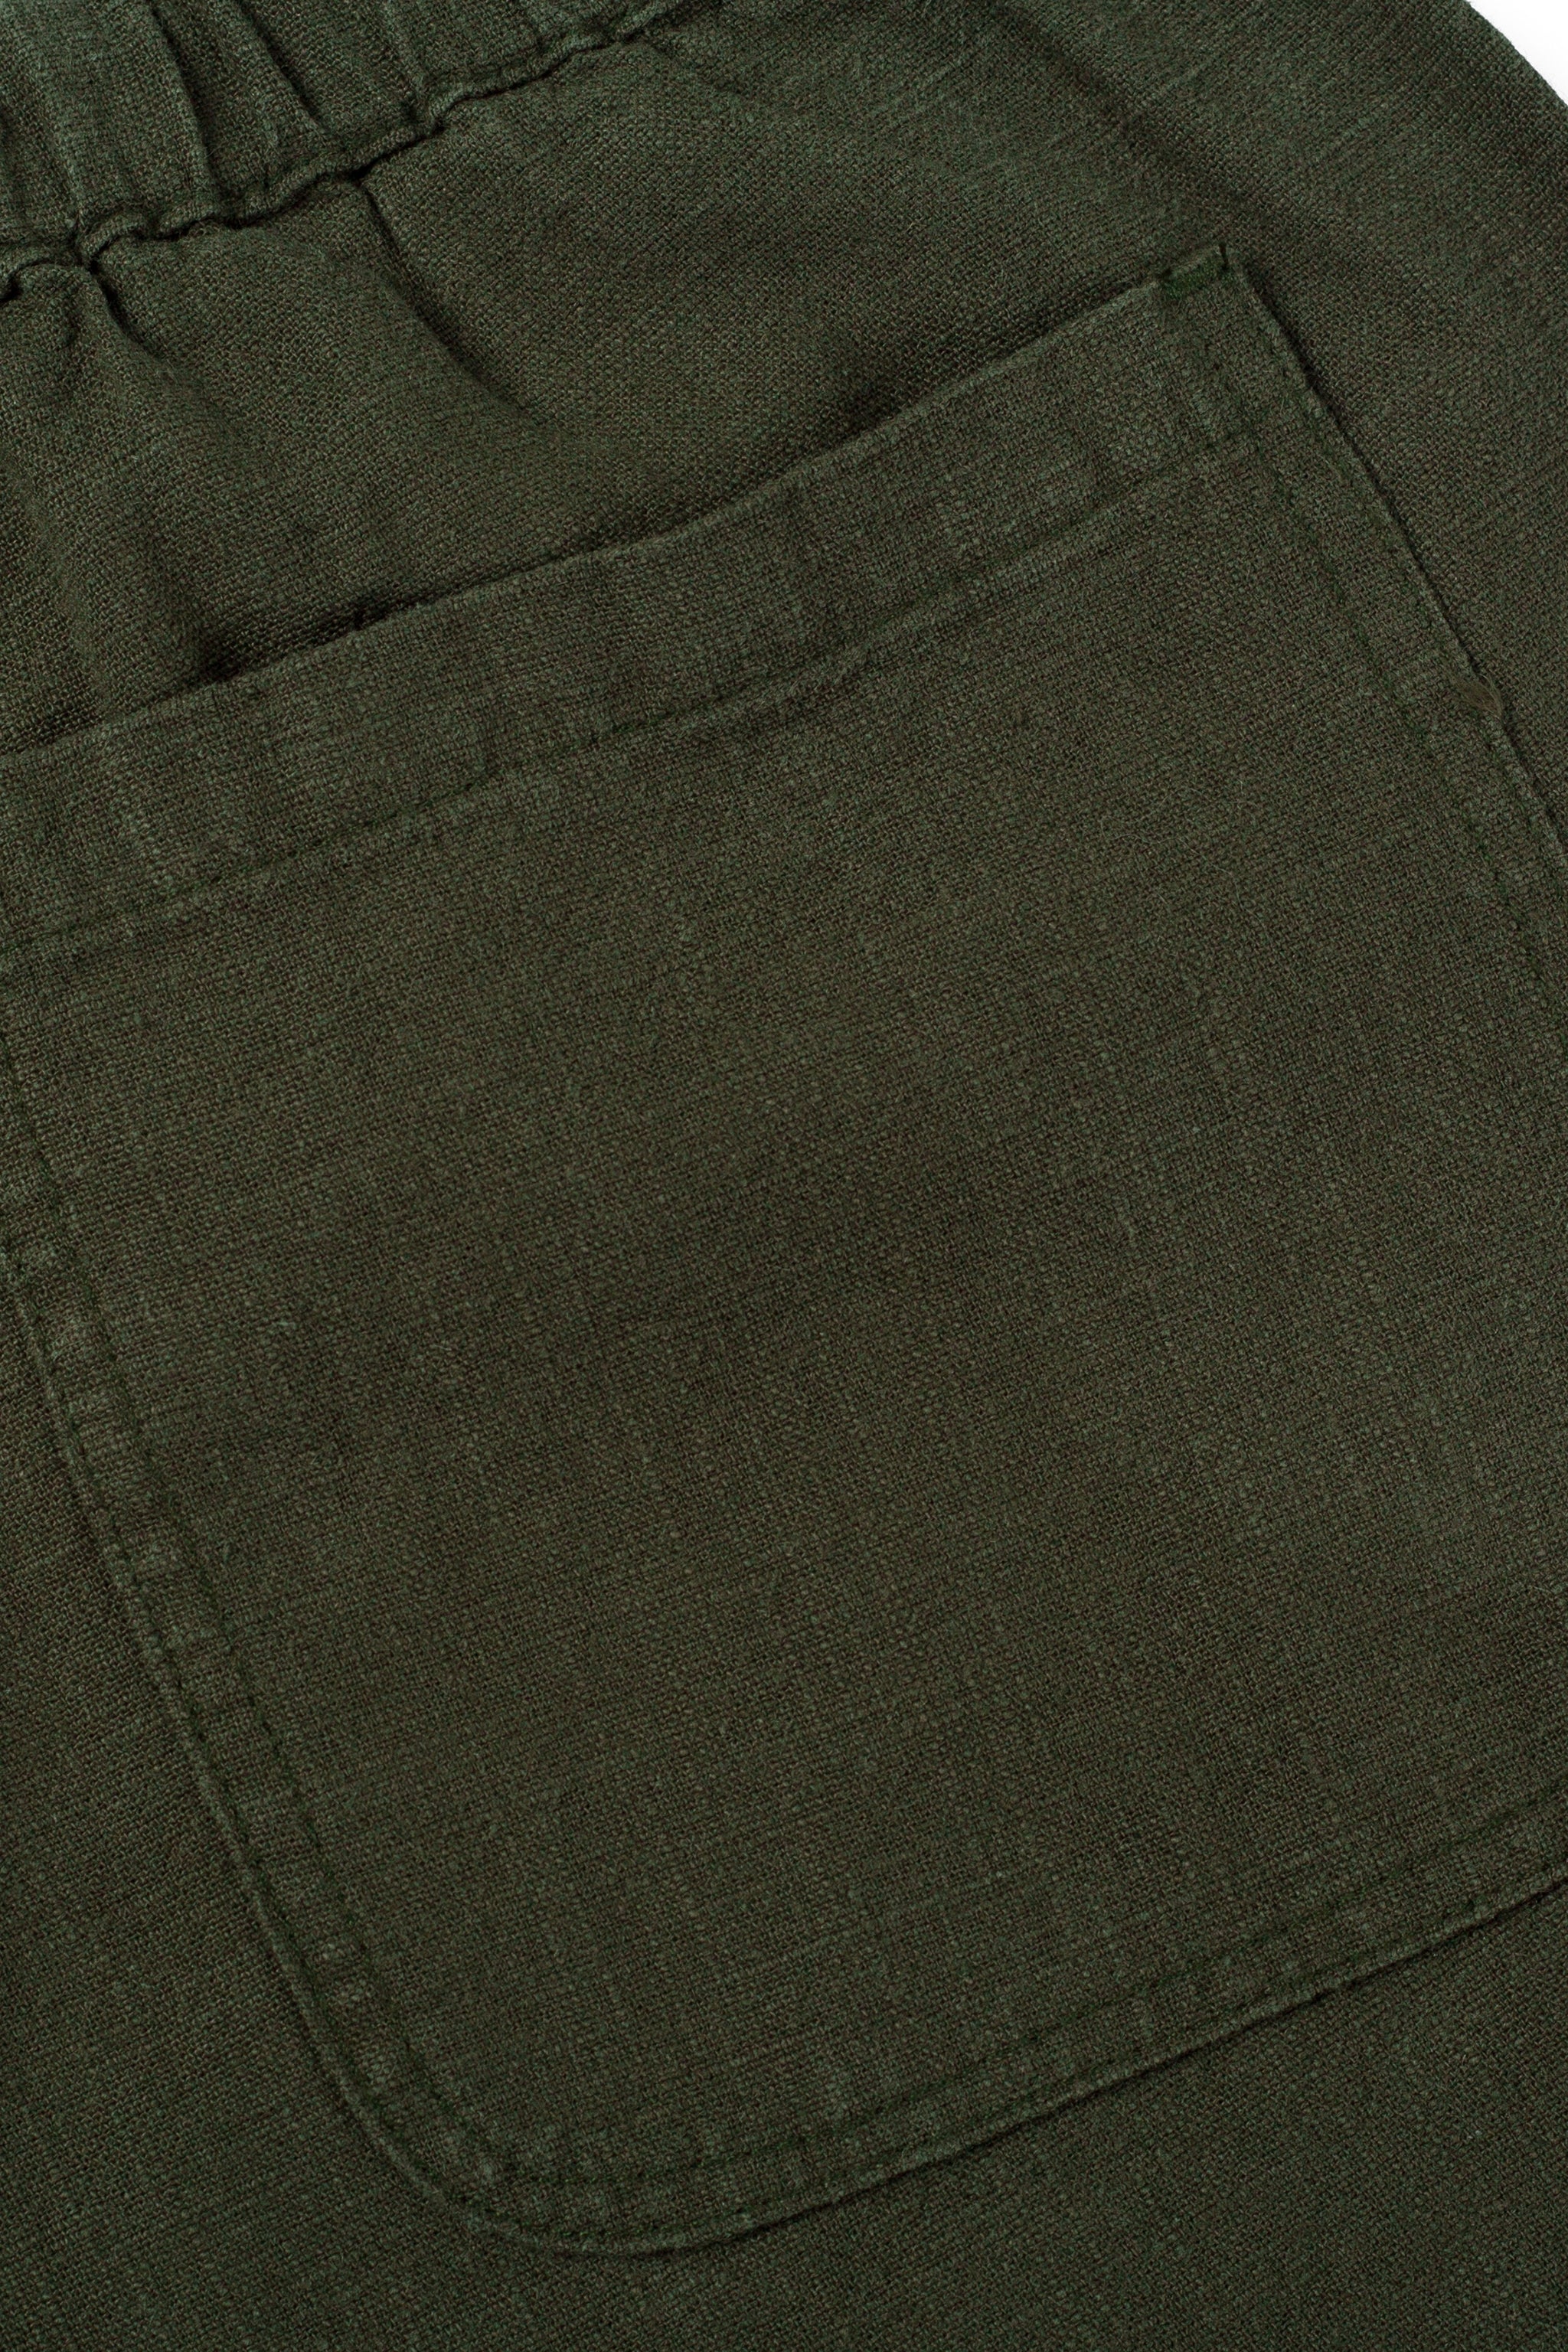 a close up of a pair of green pants